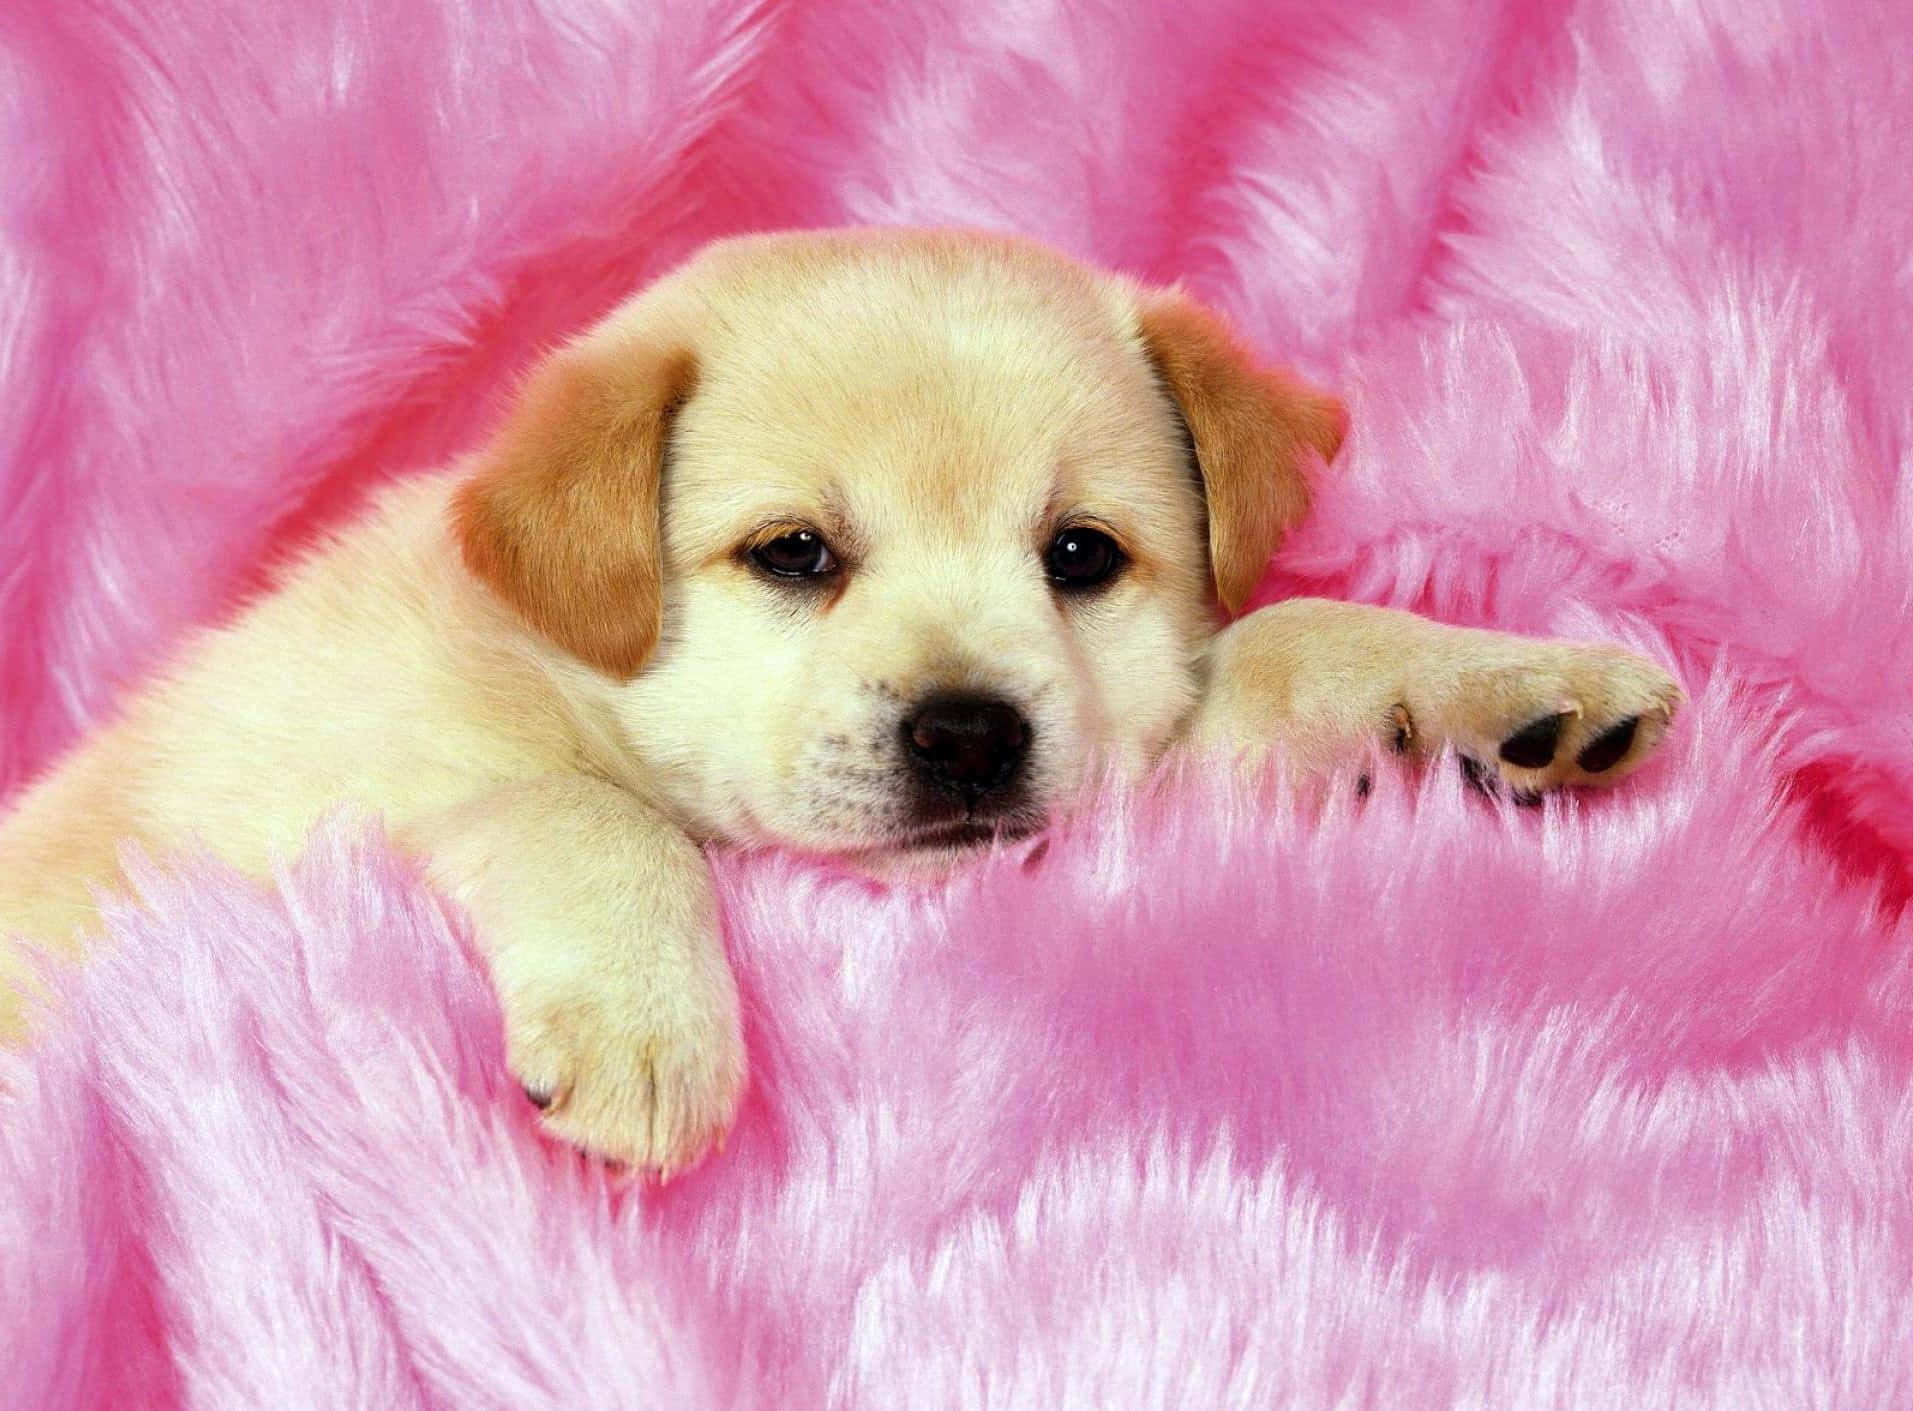 Free Pink Puppies Wallpaper Downloads, Pink Puppies Wallpaper for FREE